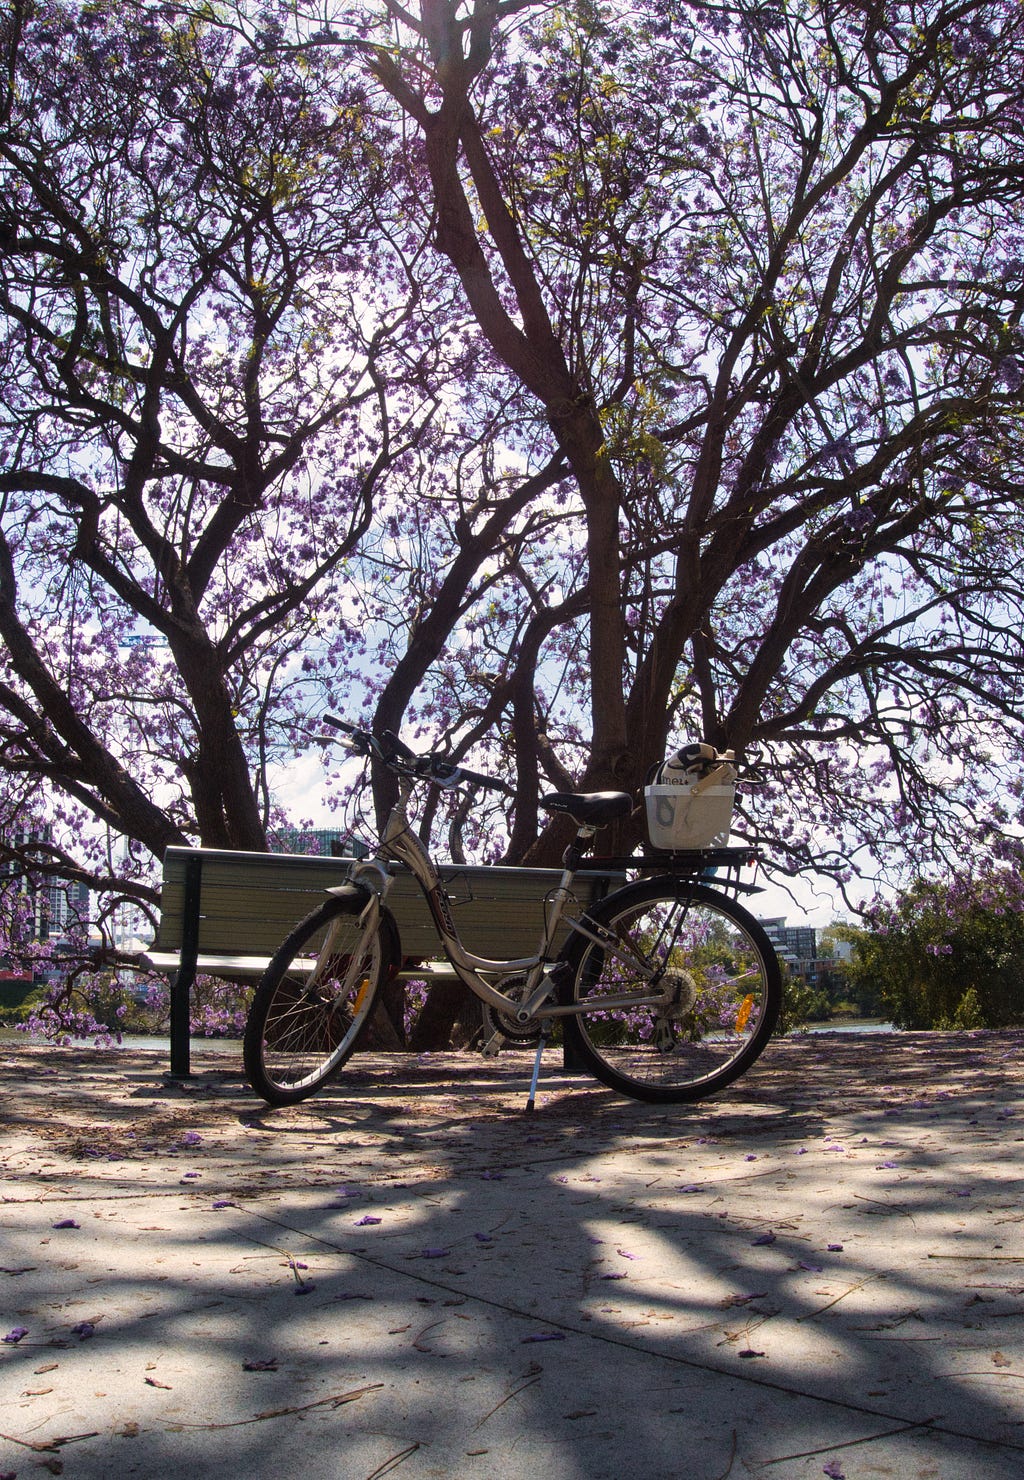 A silver-painted comfort-style lowered-top-tube bike with a white basket on the back in front of a silver metal bench (the back of the bench facing to the bike). The background has multiple branches of a jacaranda tree filling the whole frame, casting a shadow on the bike, with a light blue sky and some clouds next to a river.